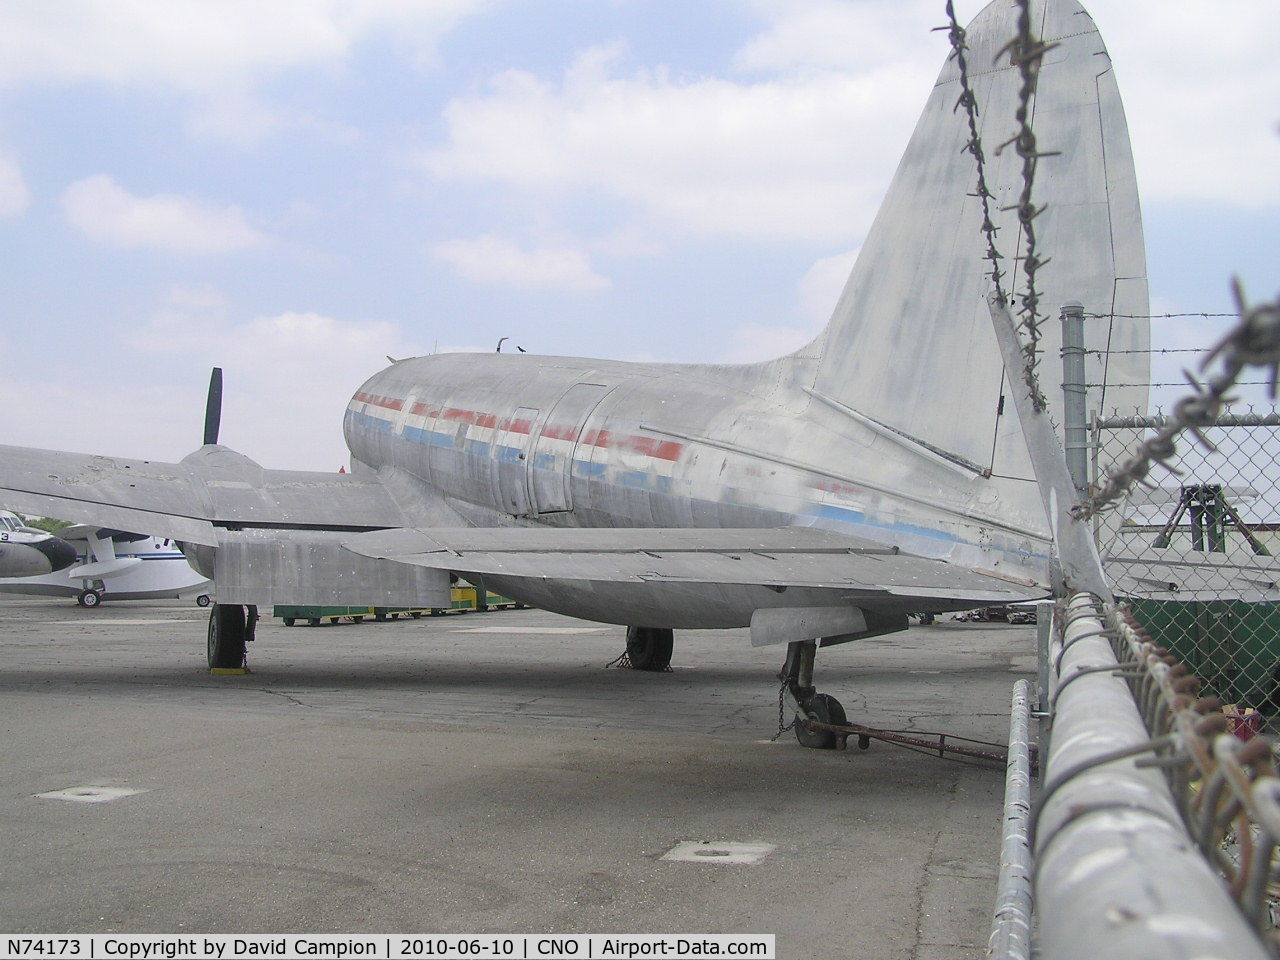 N74173, 1959 Curtiss C-46A Commando C/N 289, At The Yankees Museum, Chino